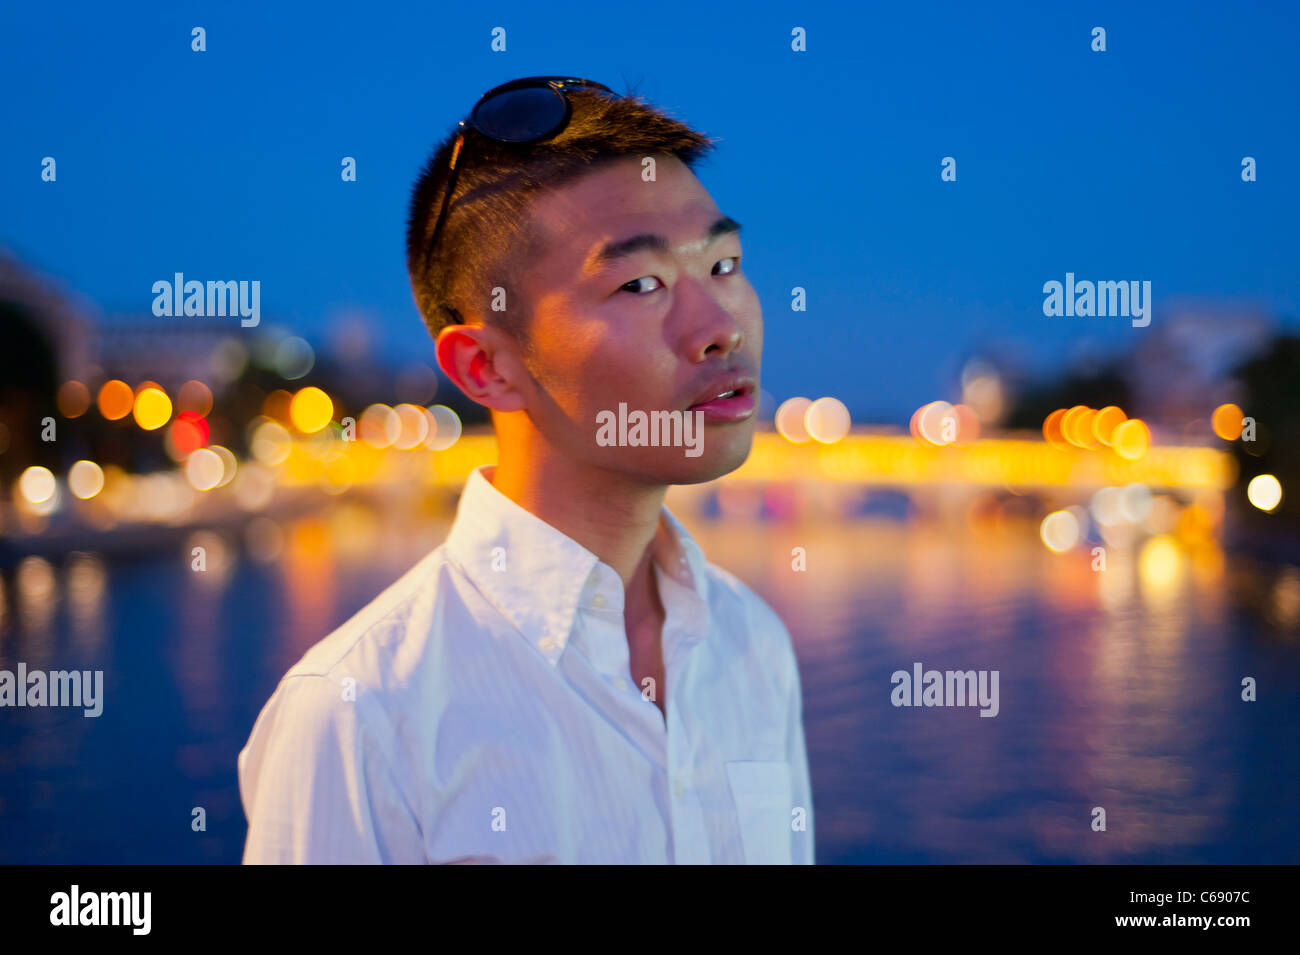 Portrait, Young Man, Chinese Outside at Night, Paris, France, man face Frontal Stock Photo